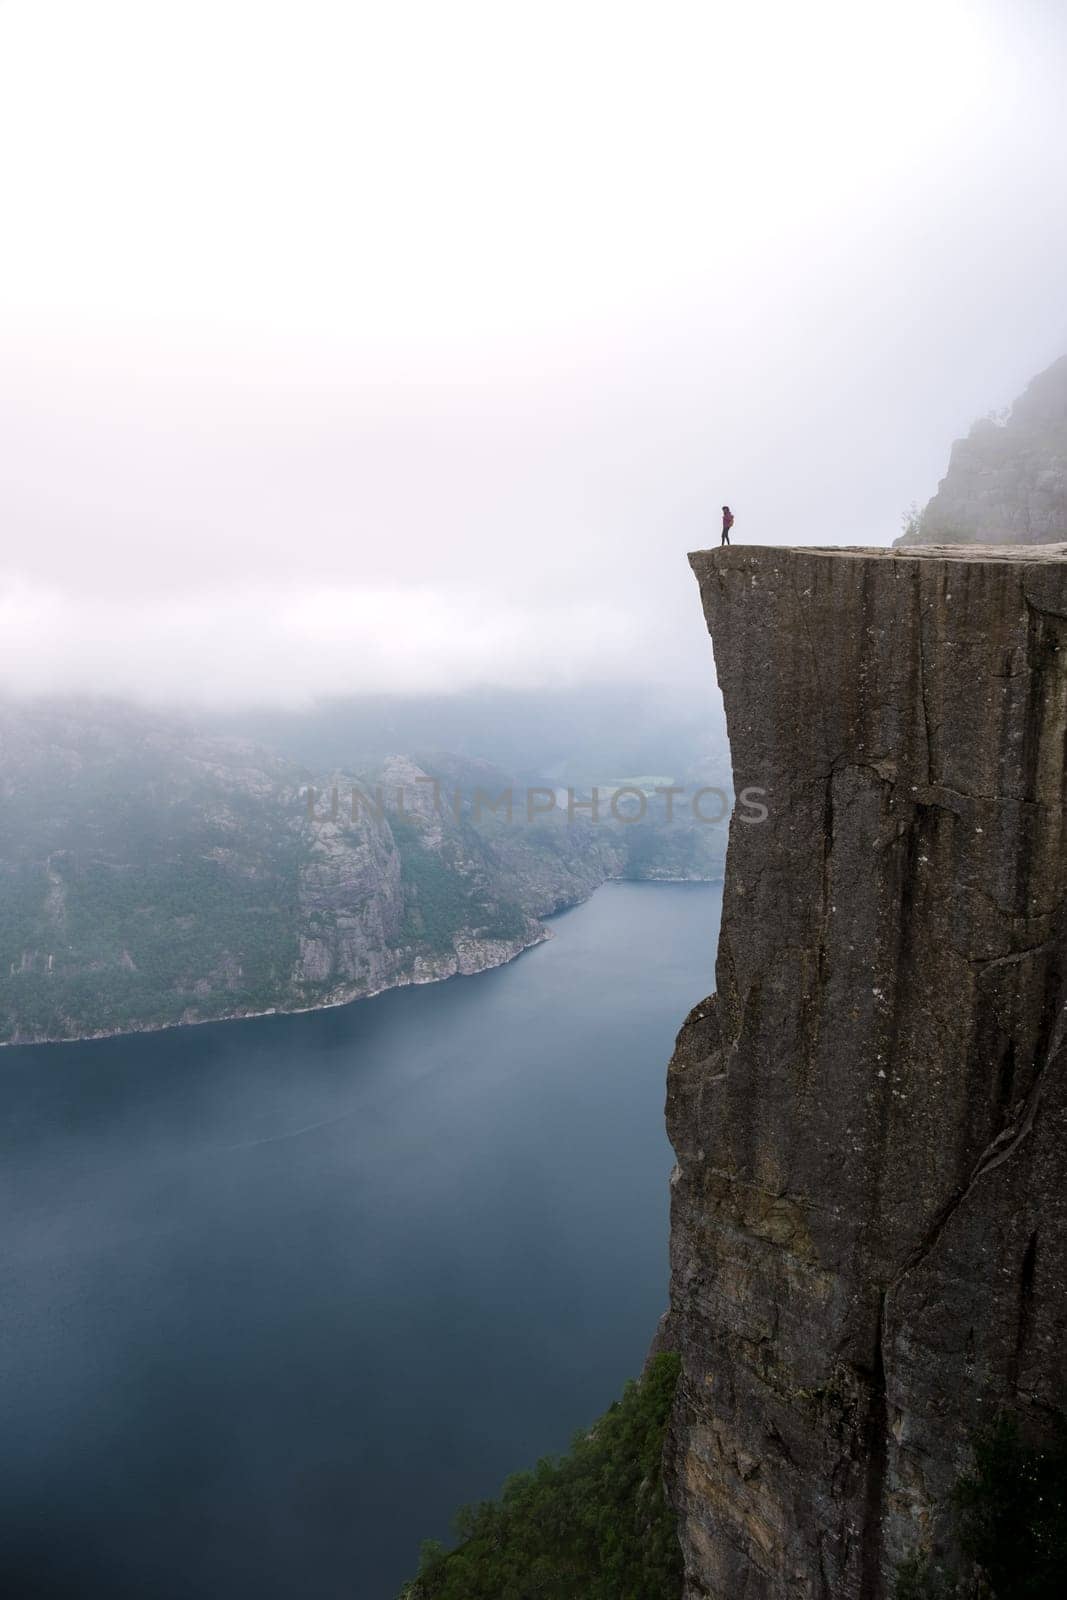 A lone individual stands on the edge of Preikestolen, a cliff in Norway overlooking a fjord. The sky is misty and the landscape is dramatic. Preikestolen, Norway